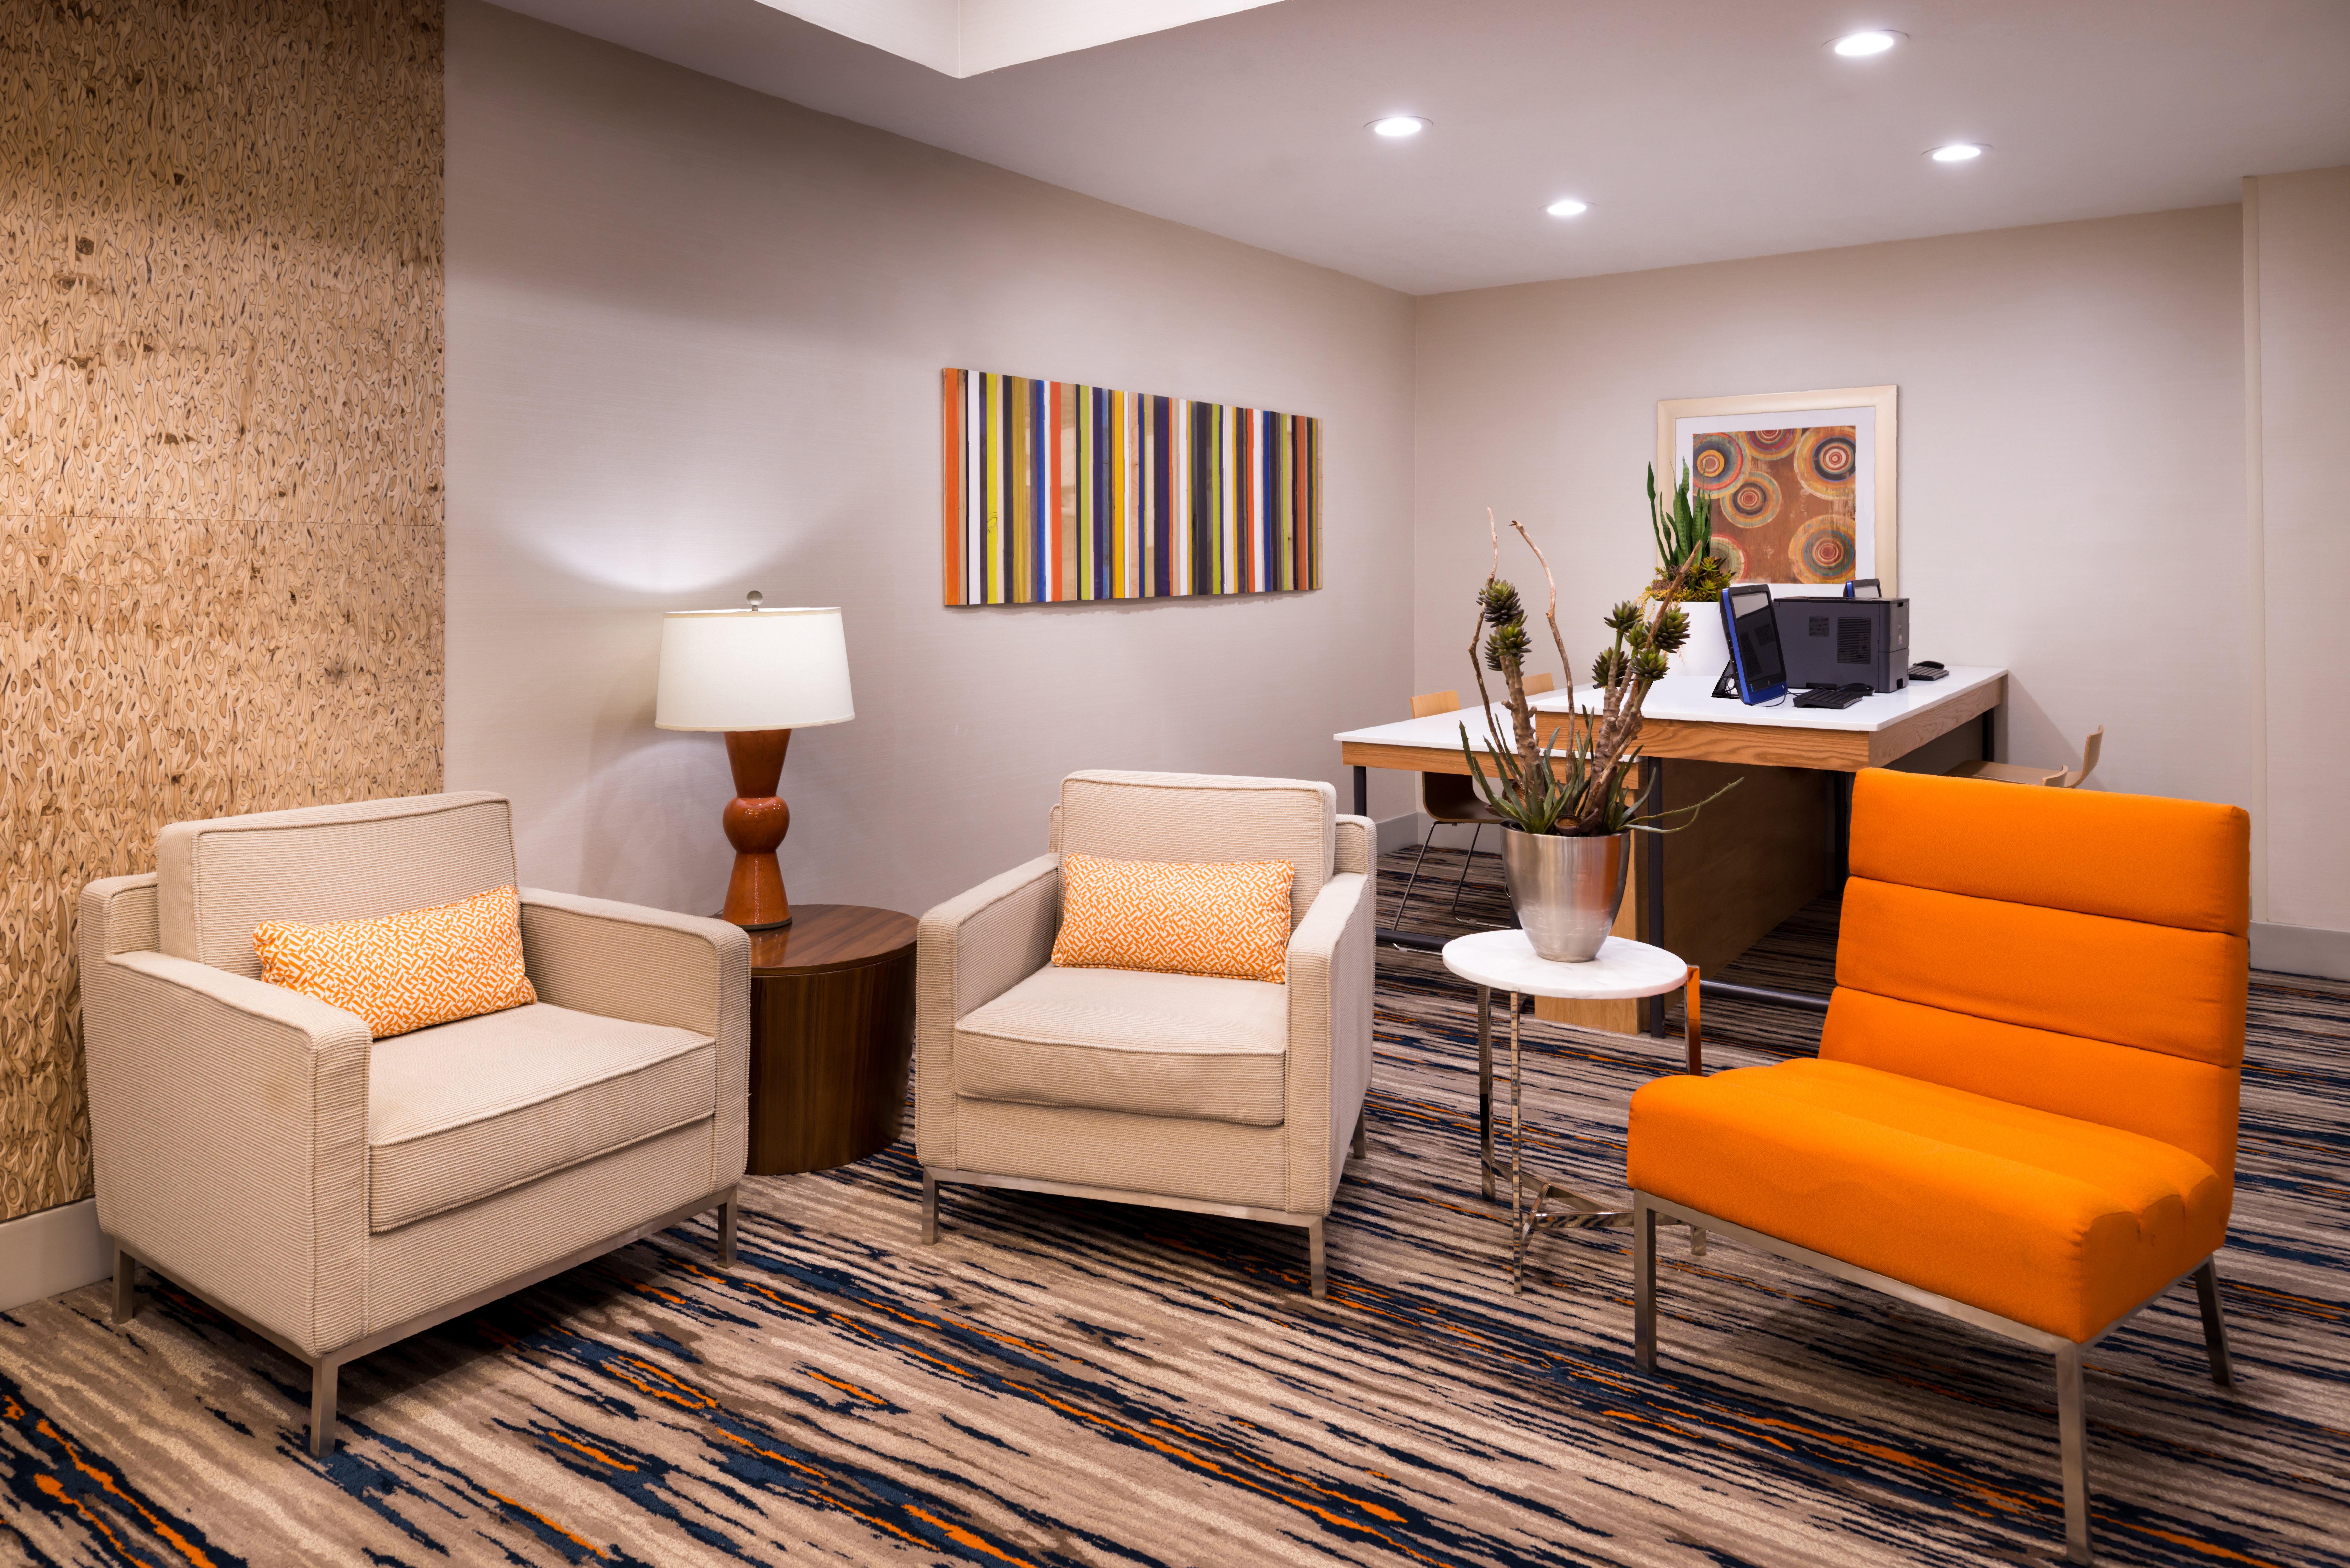 Lobby Sitting Area - enjoy free internet and business center.